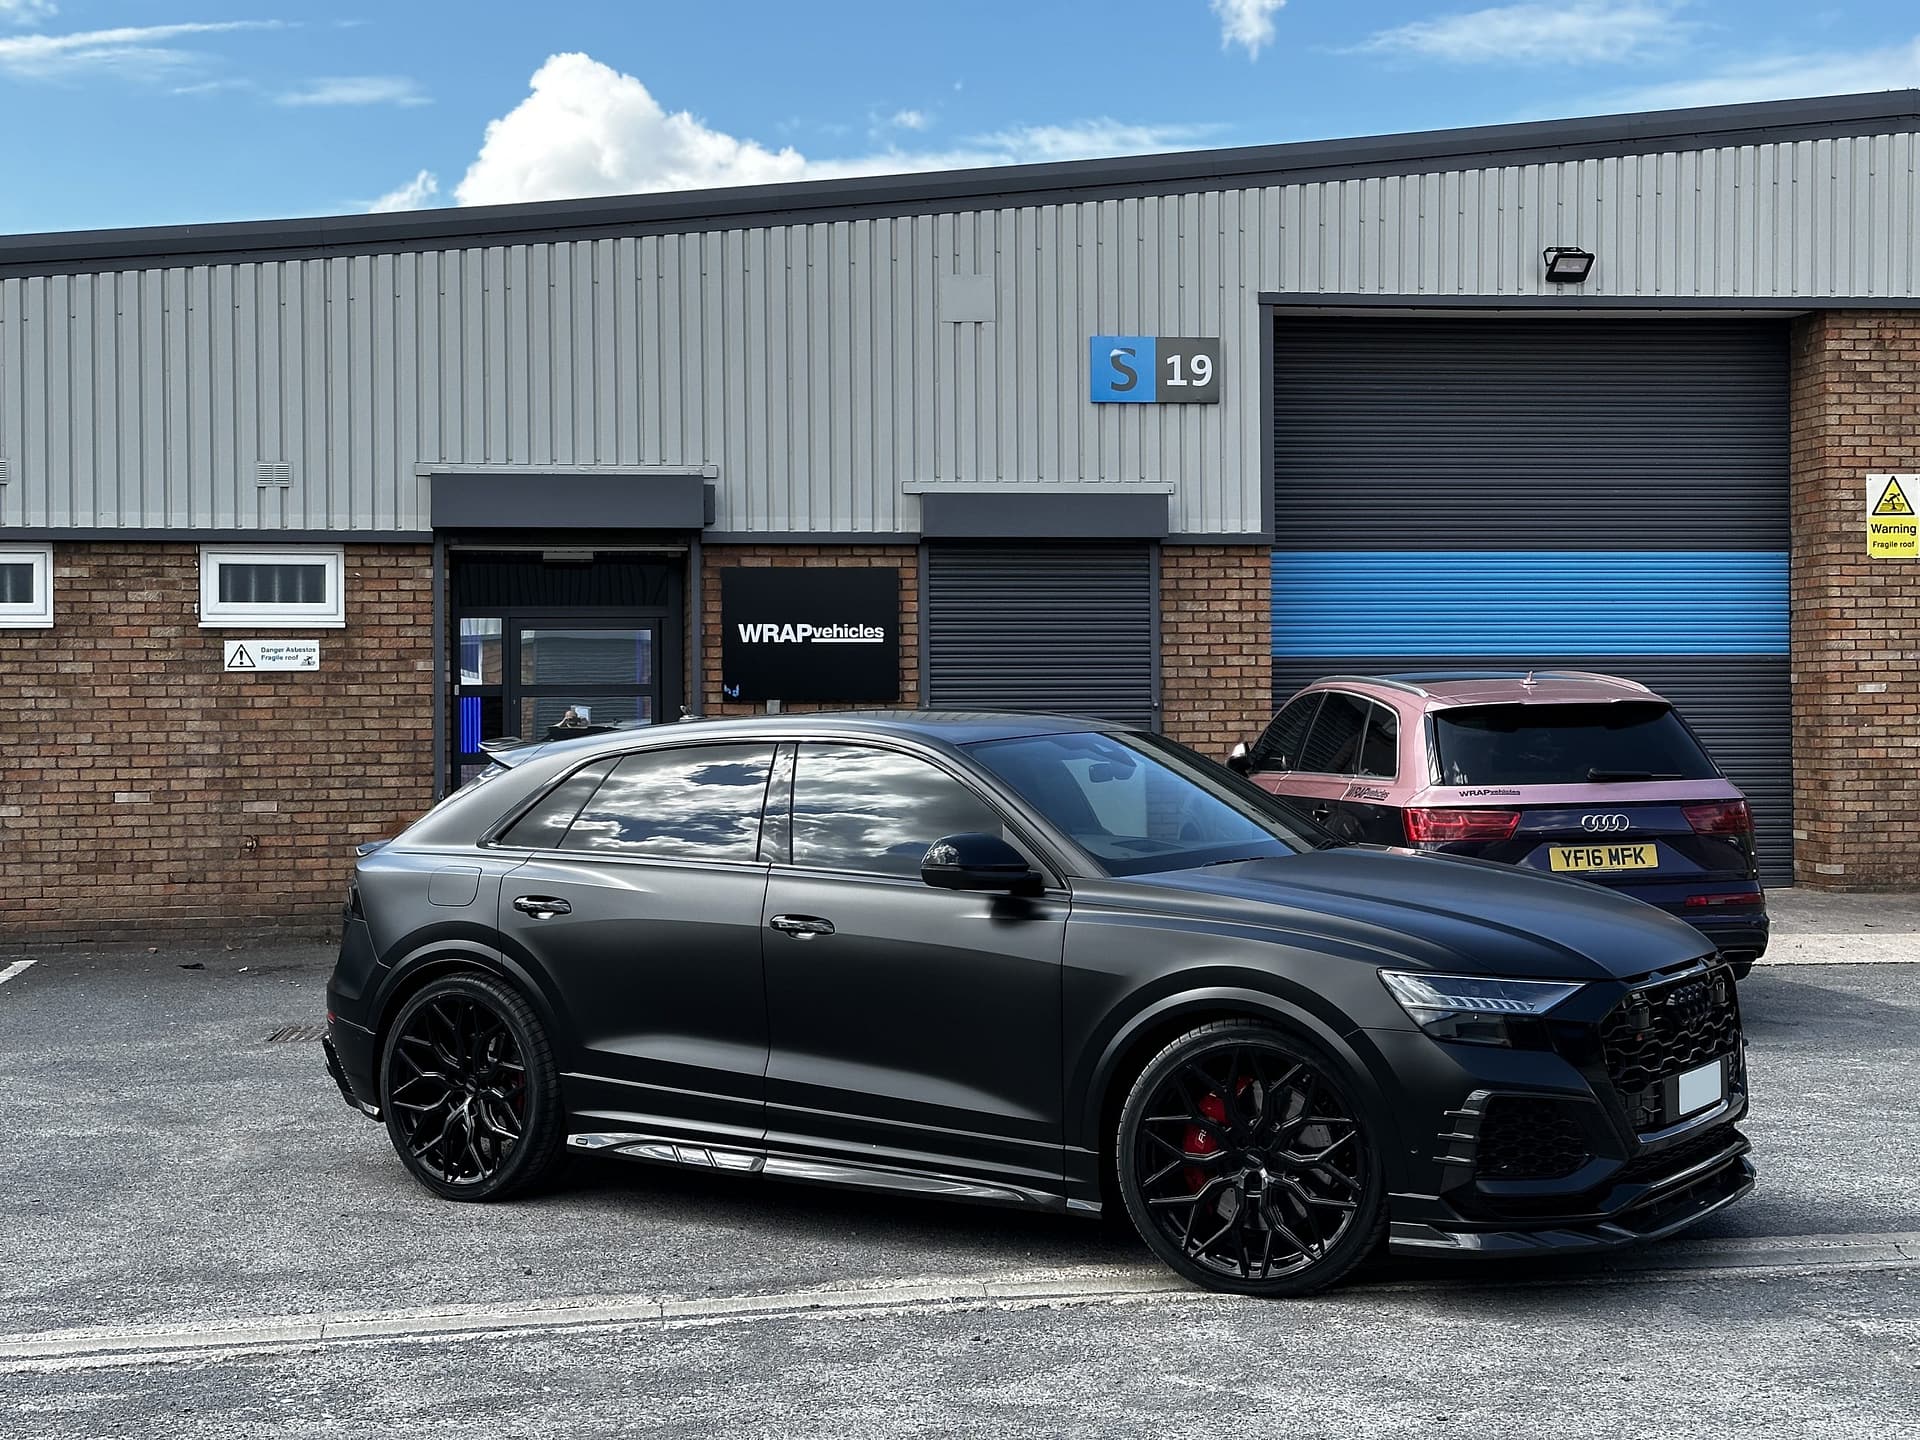 Audi RSQ8 - Full Urban Automotive Carbon Conversions with Vossen HF-2 Wheels